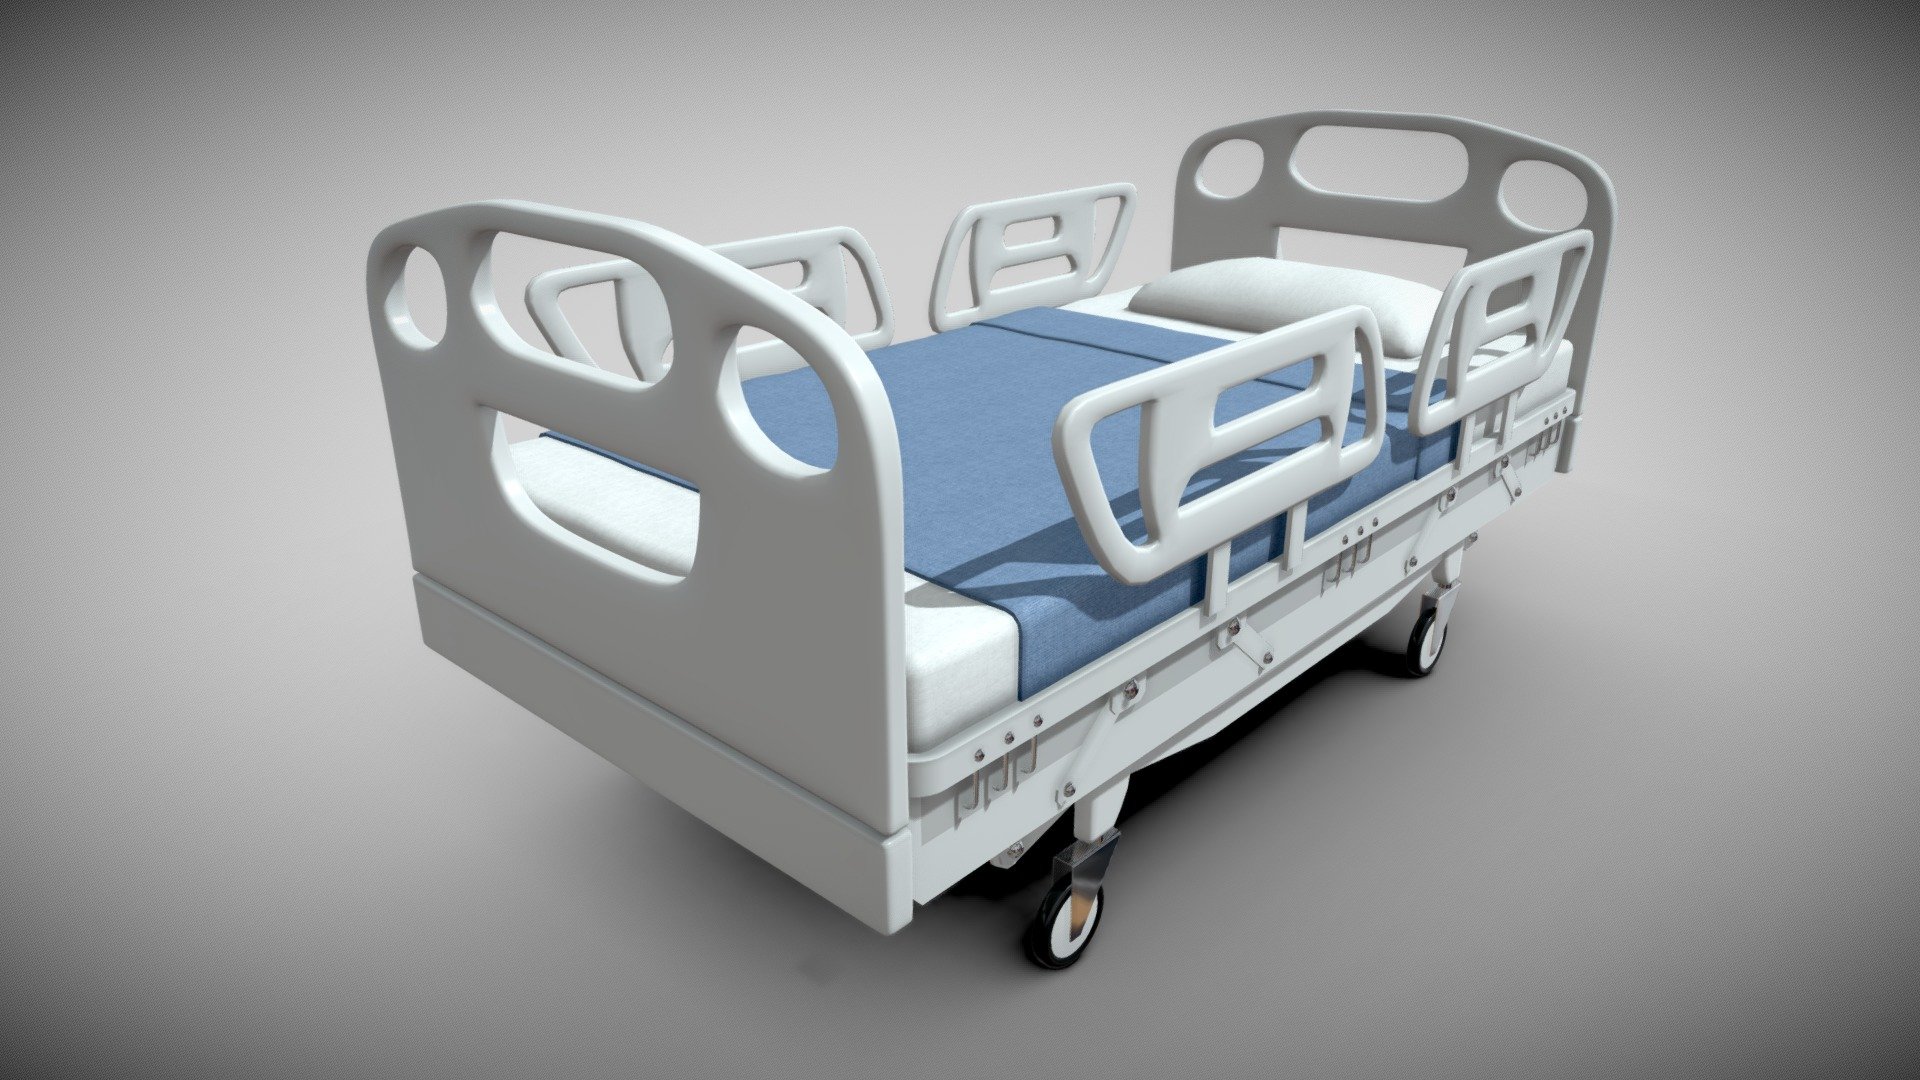 hospital bed 3D Model 2 can be an impressive element for your projects.
low polygon, realistic image, realistic overlays, fast rendering, contains a wide variety of materials 3d model